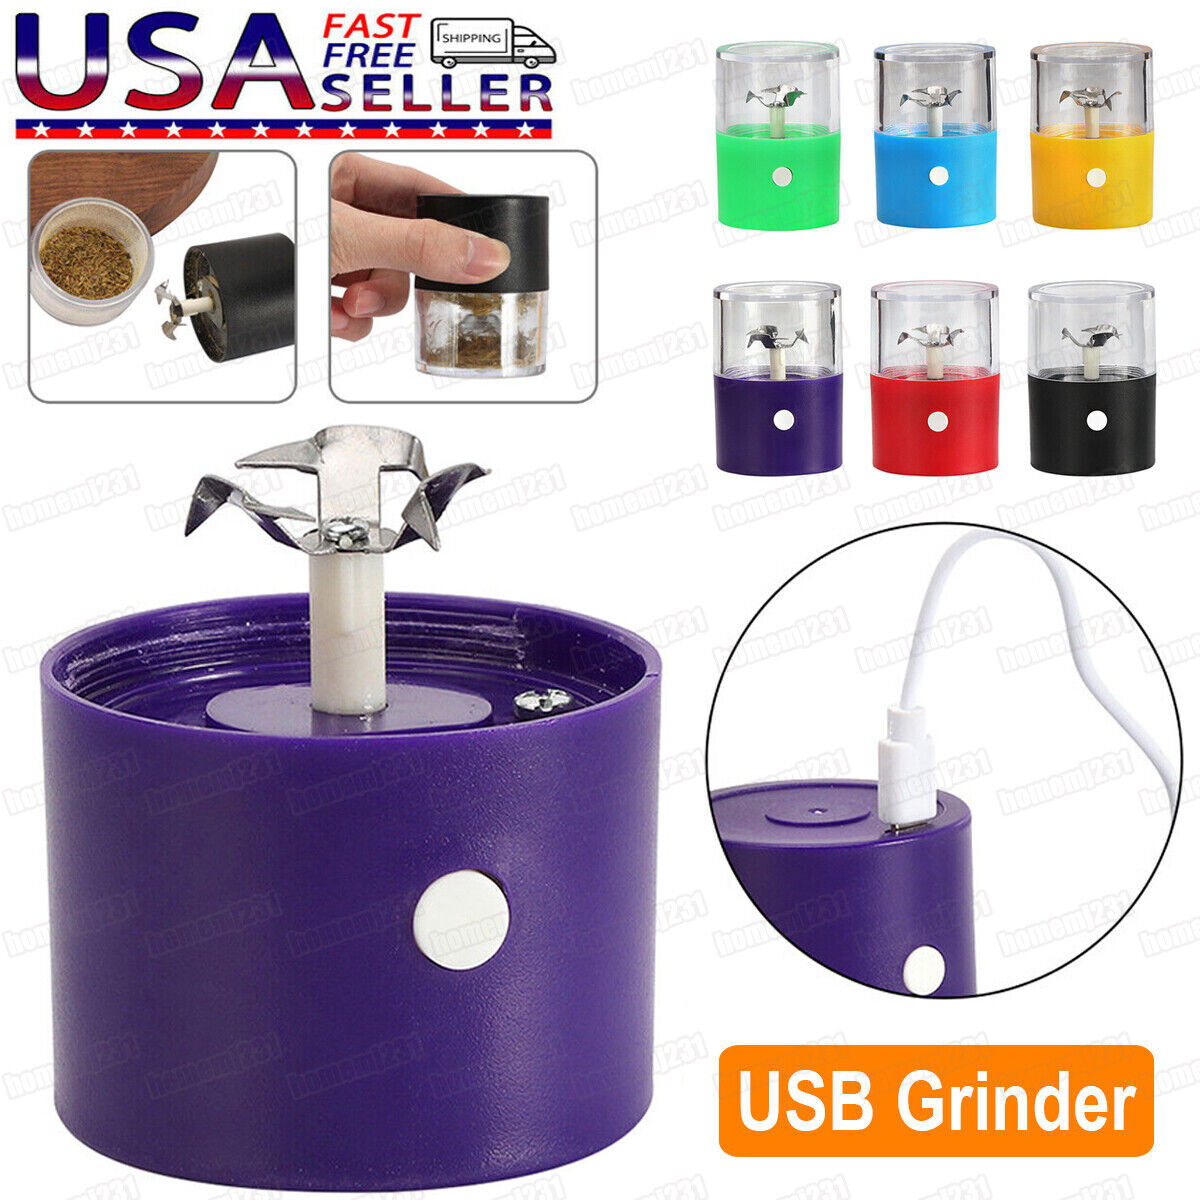 NEW Portable Electric Auto Herb Tobacco Grinder Crusher Machine USB Rechargeable